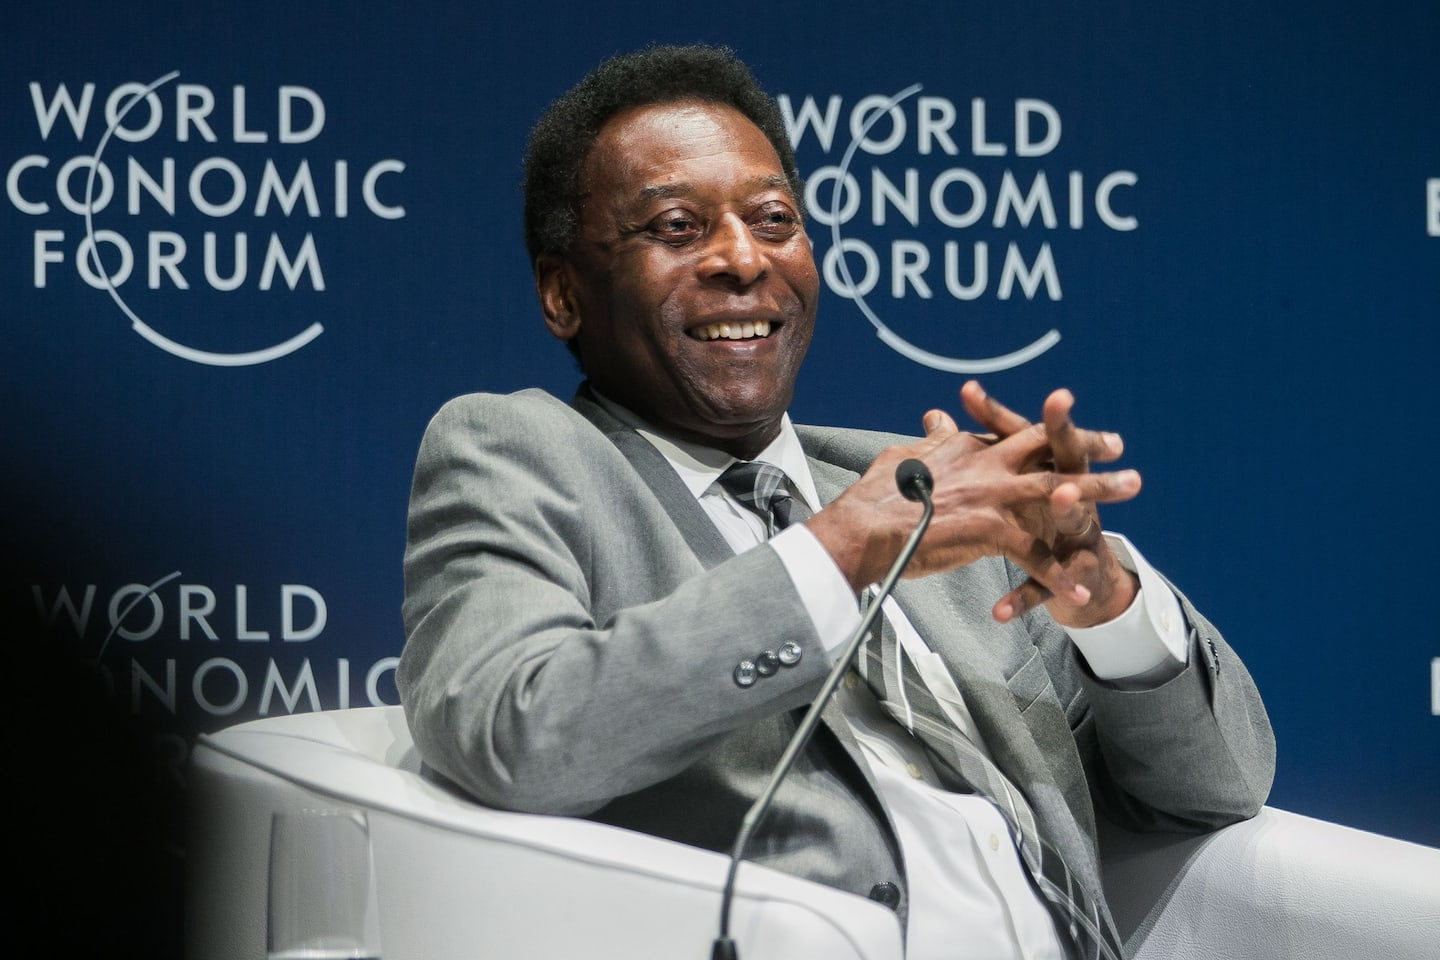 Brazil: Pelé's relatives at his bedside in hospital